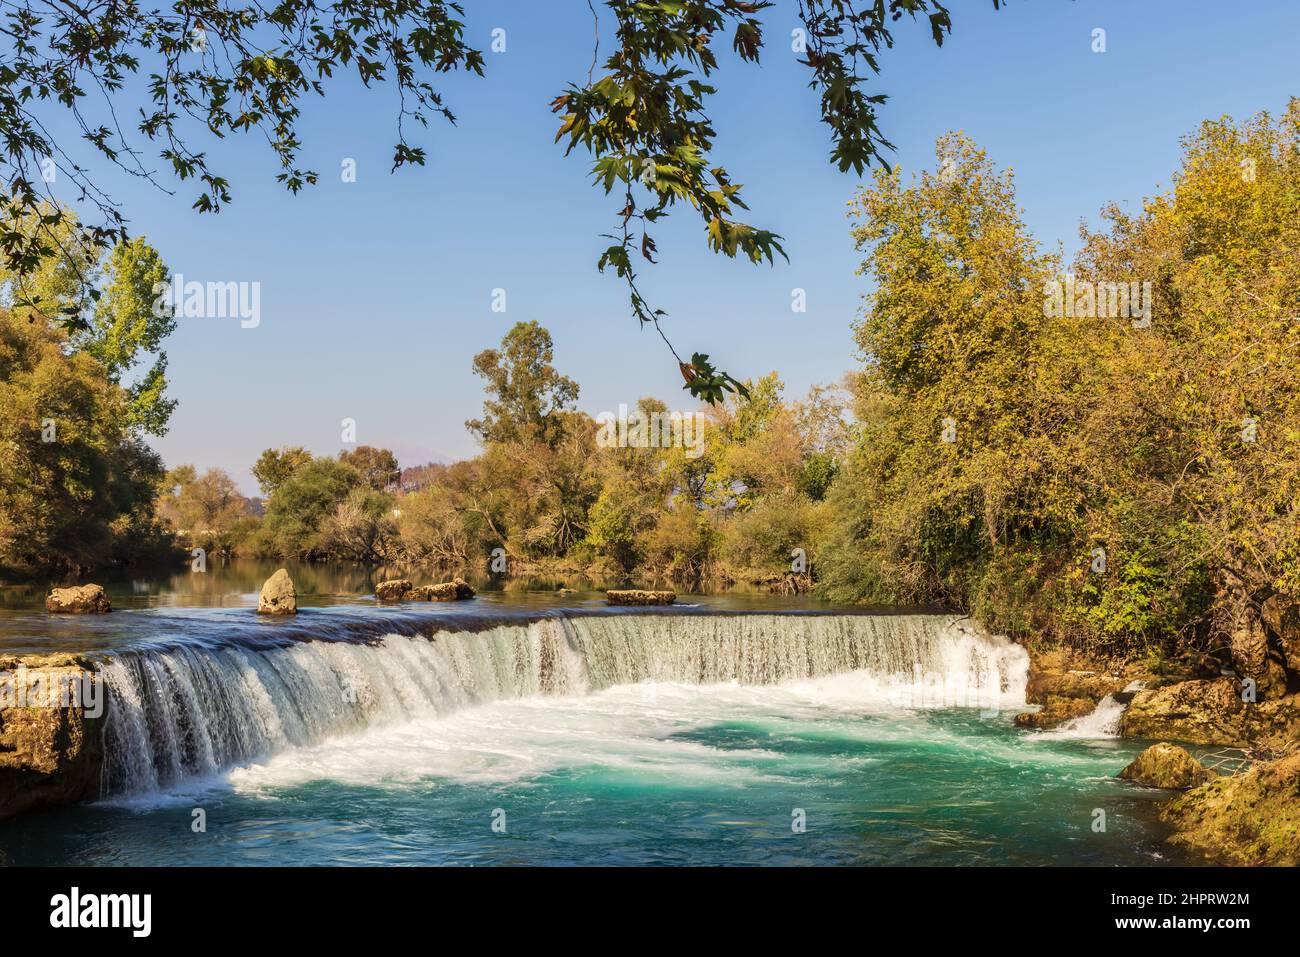 Turquoise water of Manavgat River flowing over the Manavgat Waterfall. Stock Photo